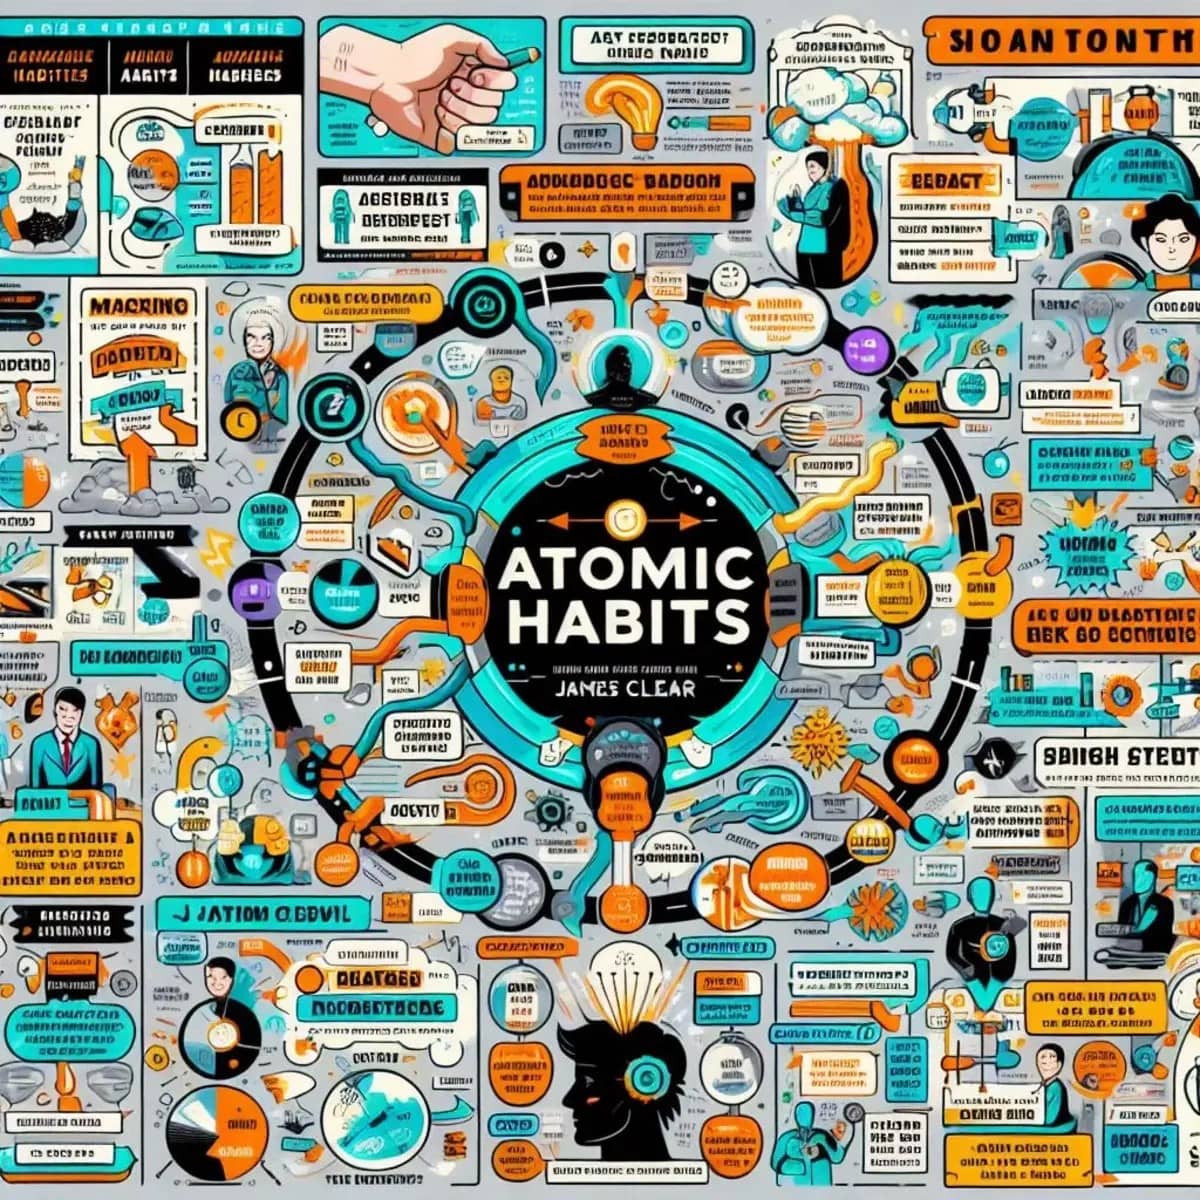 A Comprehensive Book Summary of "Atomic Habits" with 8 Key Takeaways